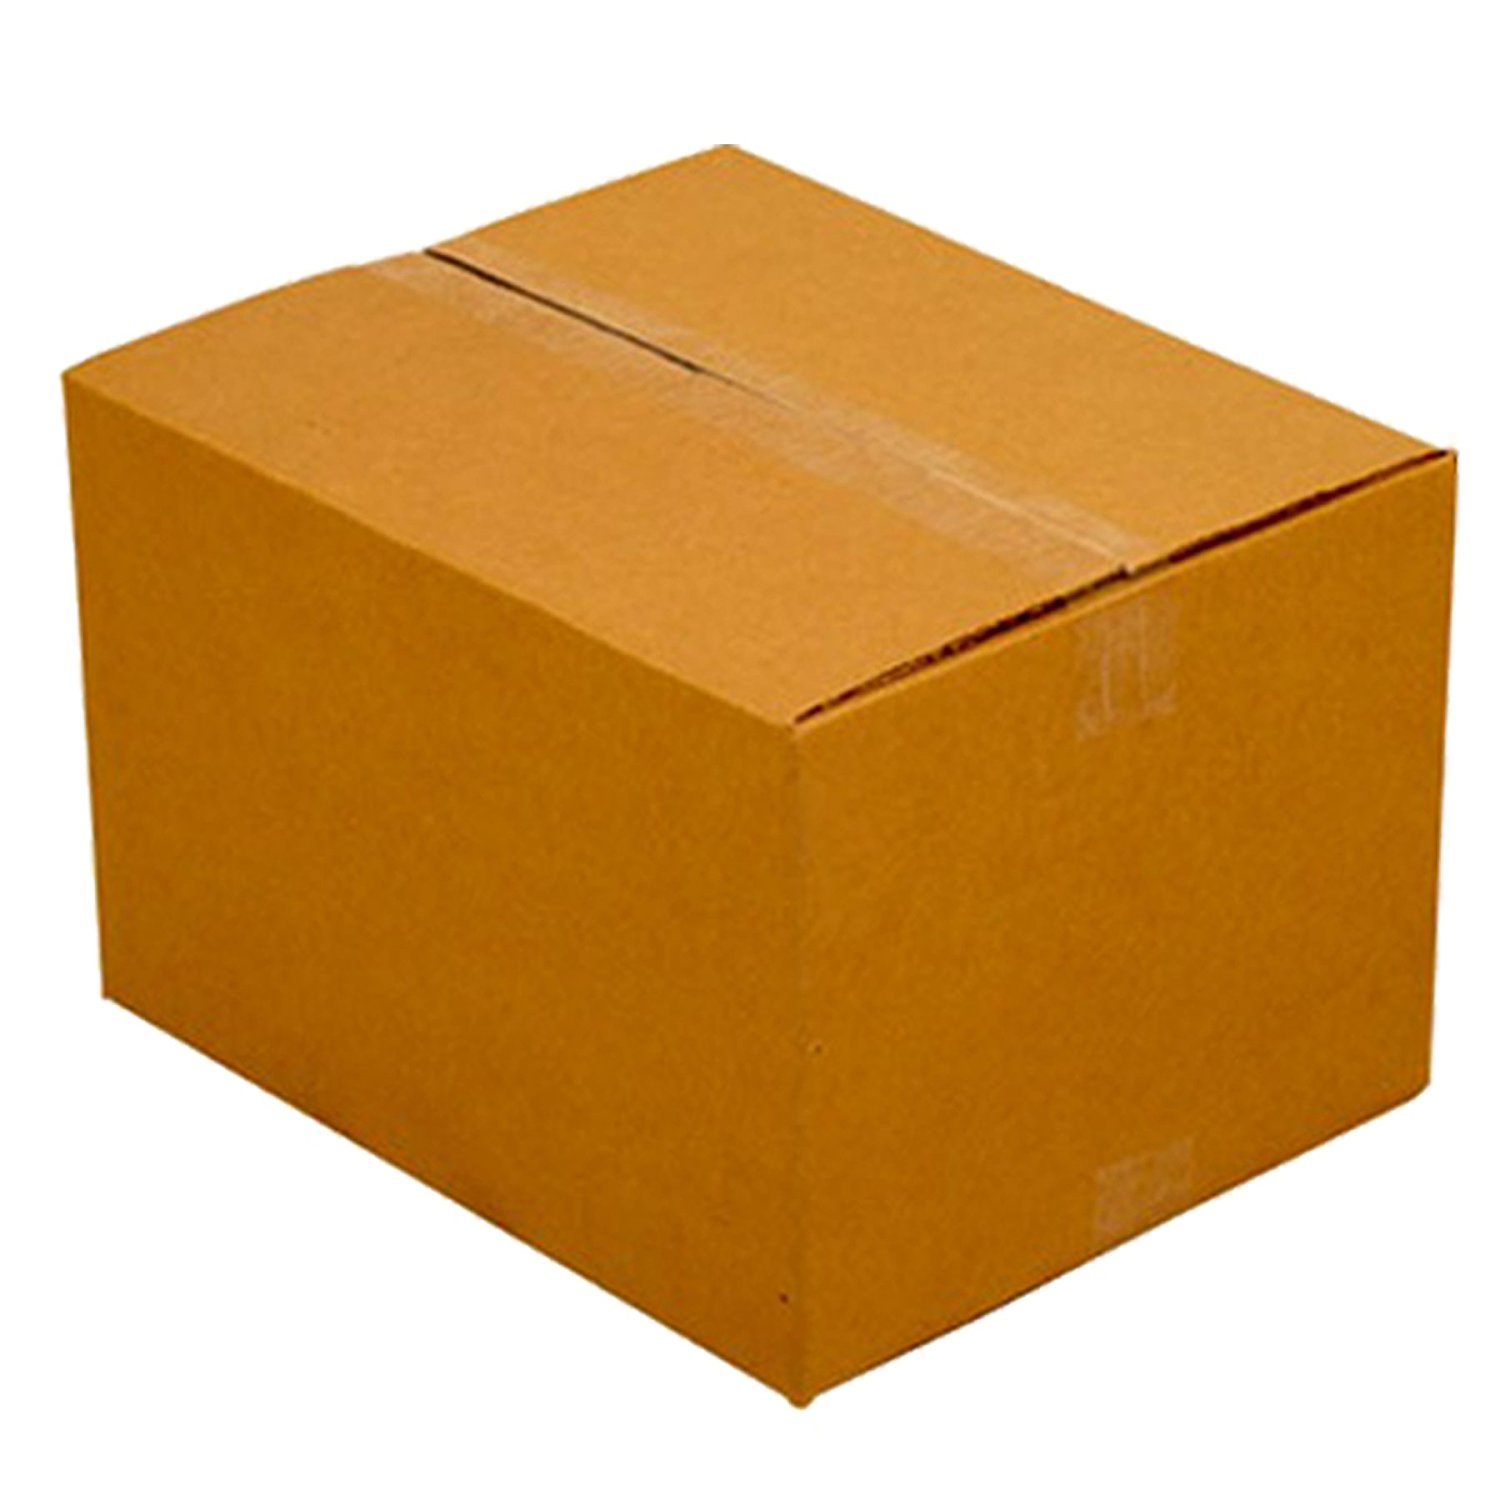 UBOXES Moving Boxes Medium 18x14x12-Inches (Pack of 10) Professional ...